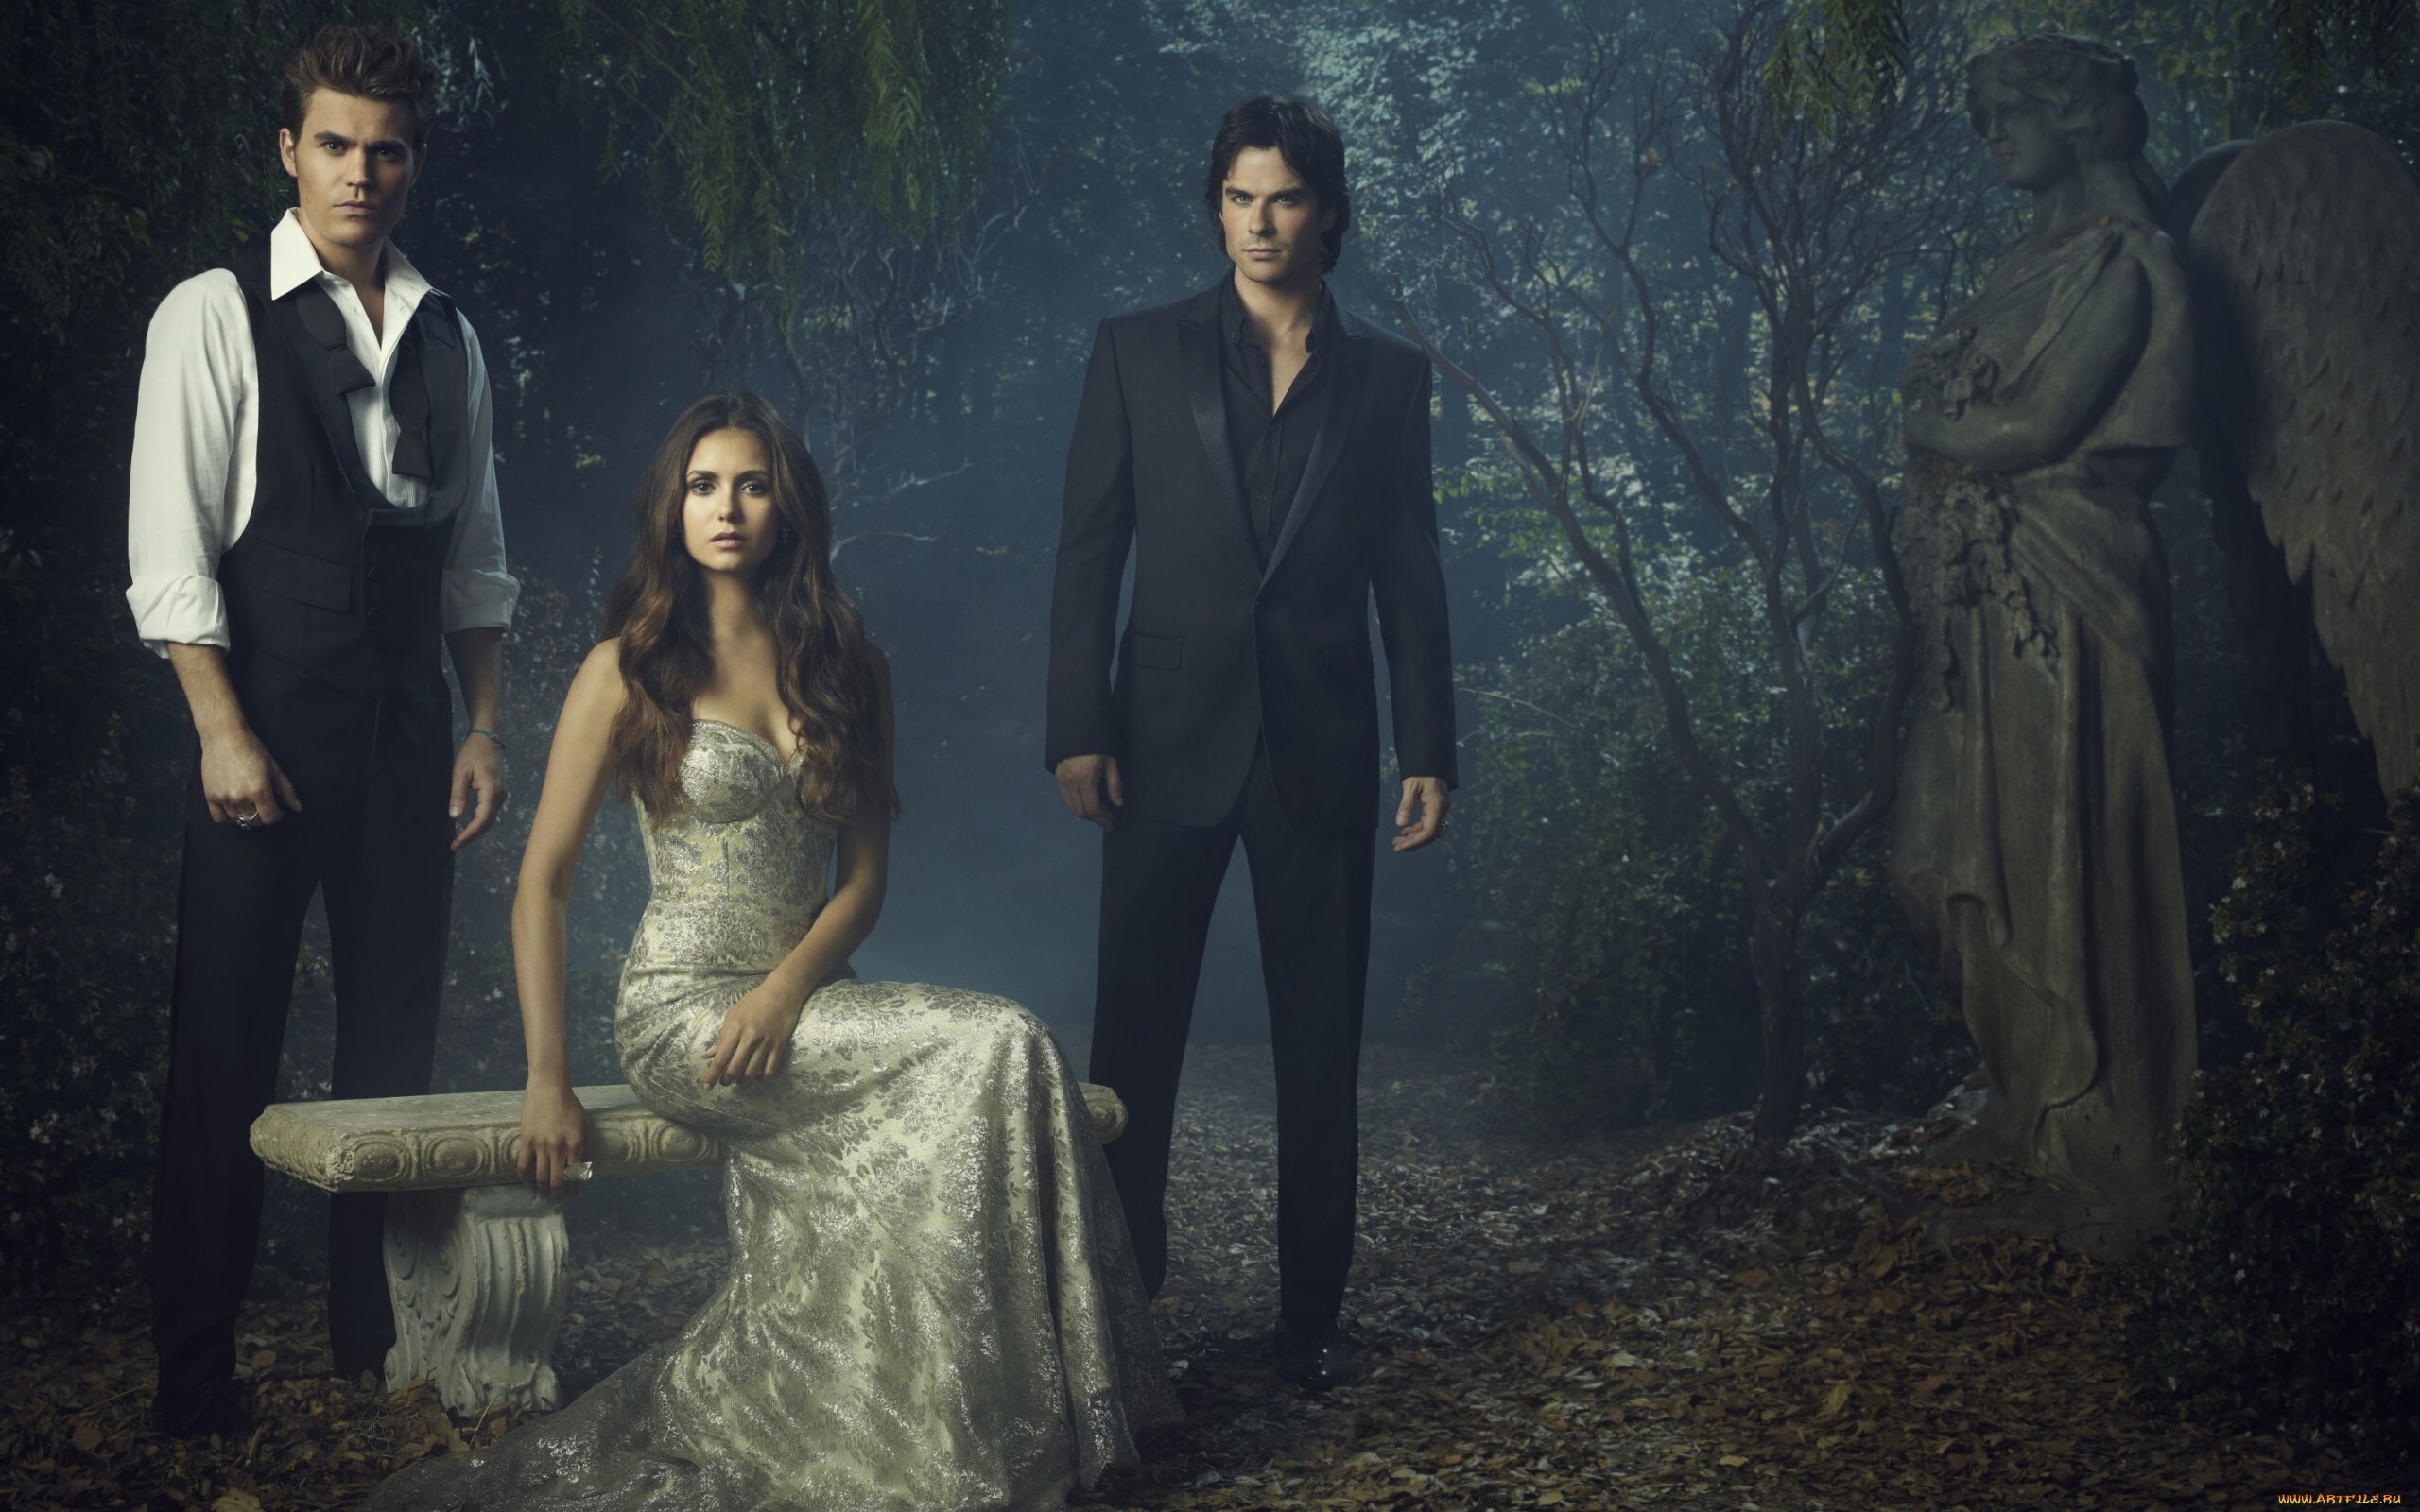 The Vampire Diaries (TV Series): Main Characters Trio, Filming Location In The Graveyard. 2560x1600 HD Wallpaper.